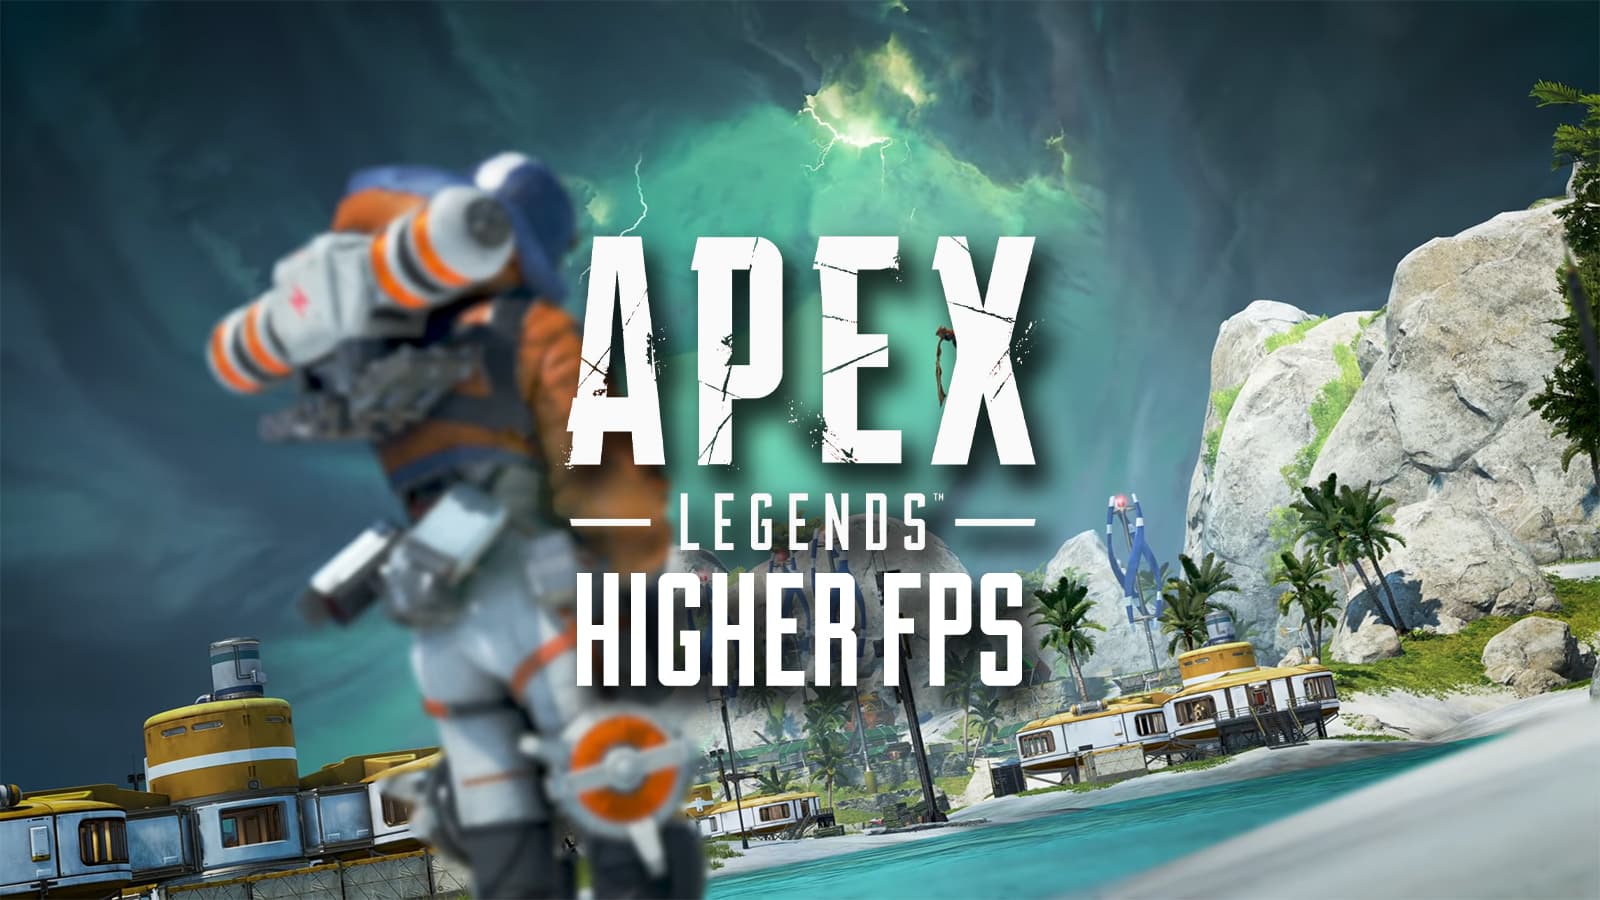 How to get higher FPS in Apex Legends and avoid 144 FPS cap on PC